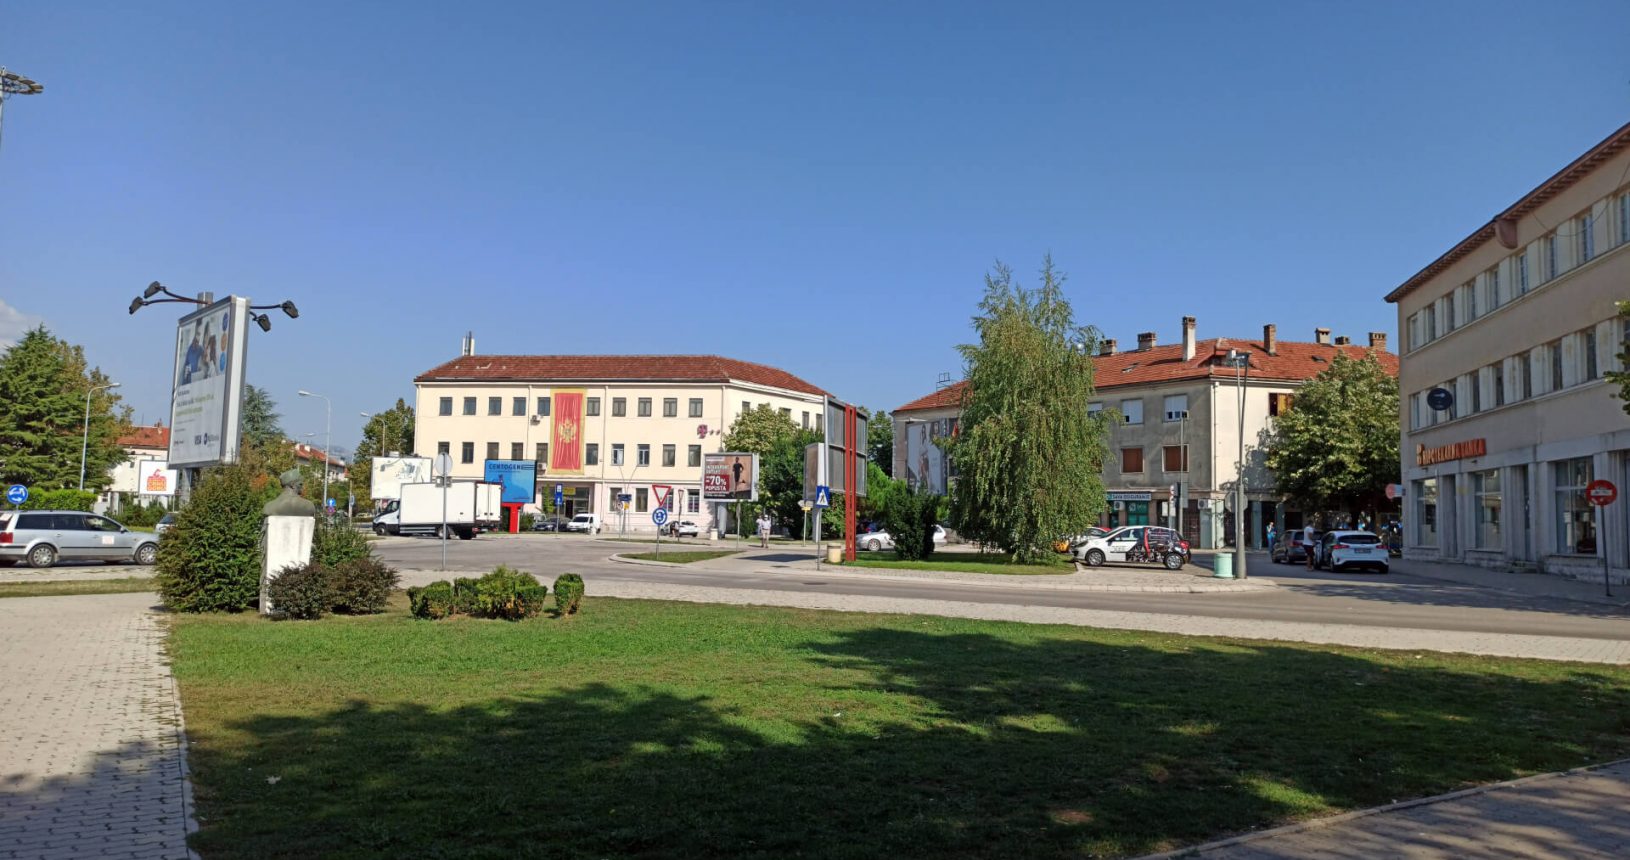 Wide squares in Niksic